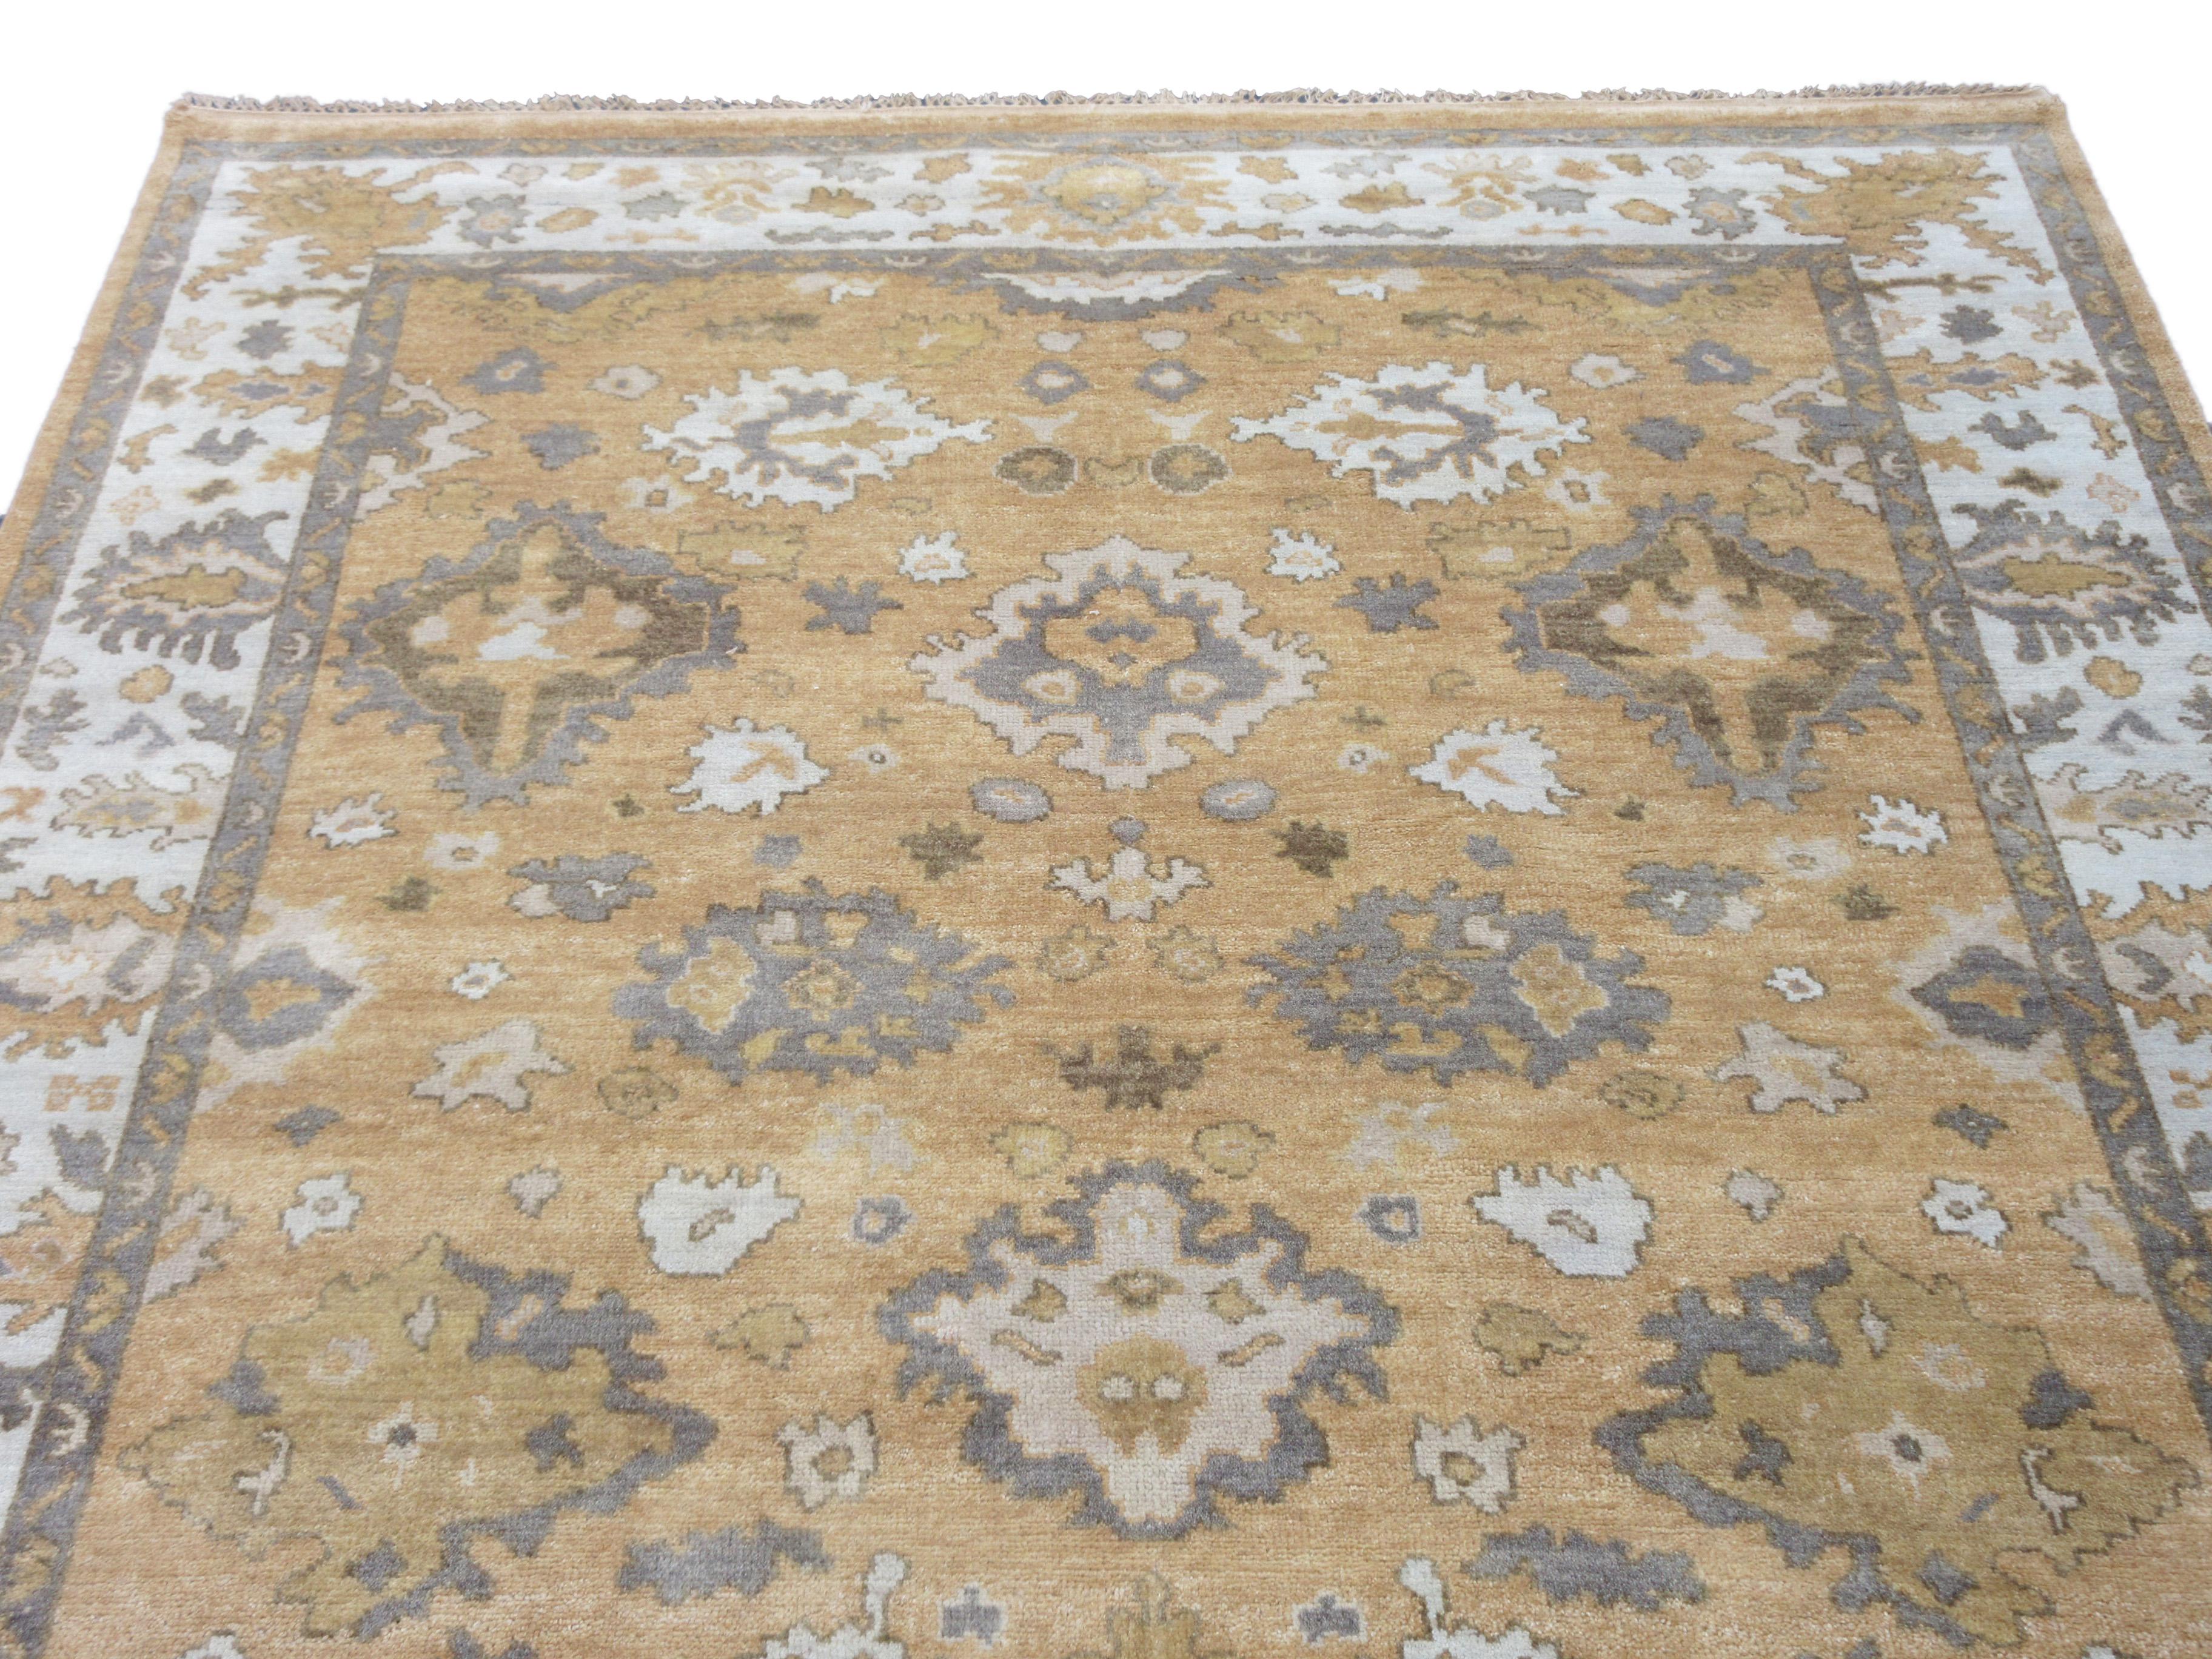 Hand-knotted, wool pile on a cotton foundation.

Dimensions: 8' x 10'

Origin: India

Field Color: Apricot

Border Color: Light-Blue

Accent colors: brown, grey.